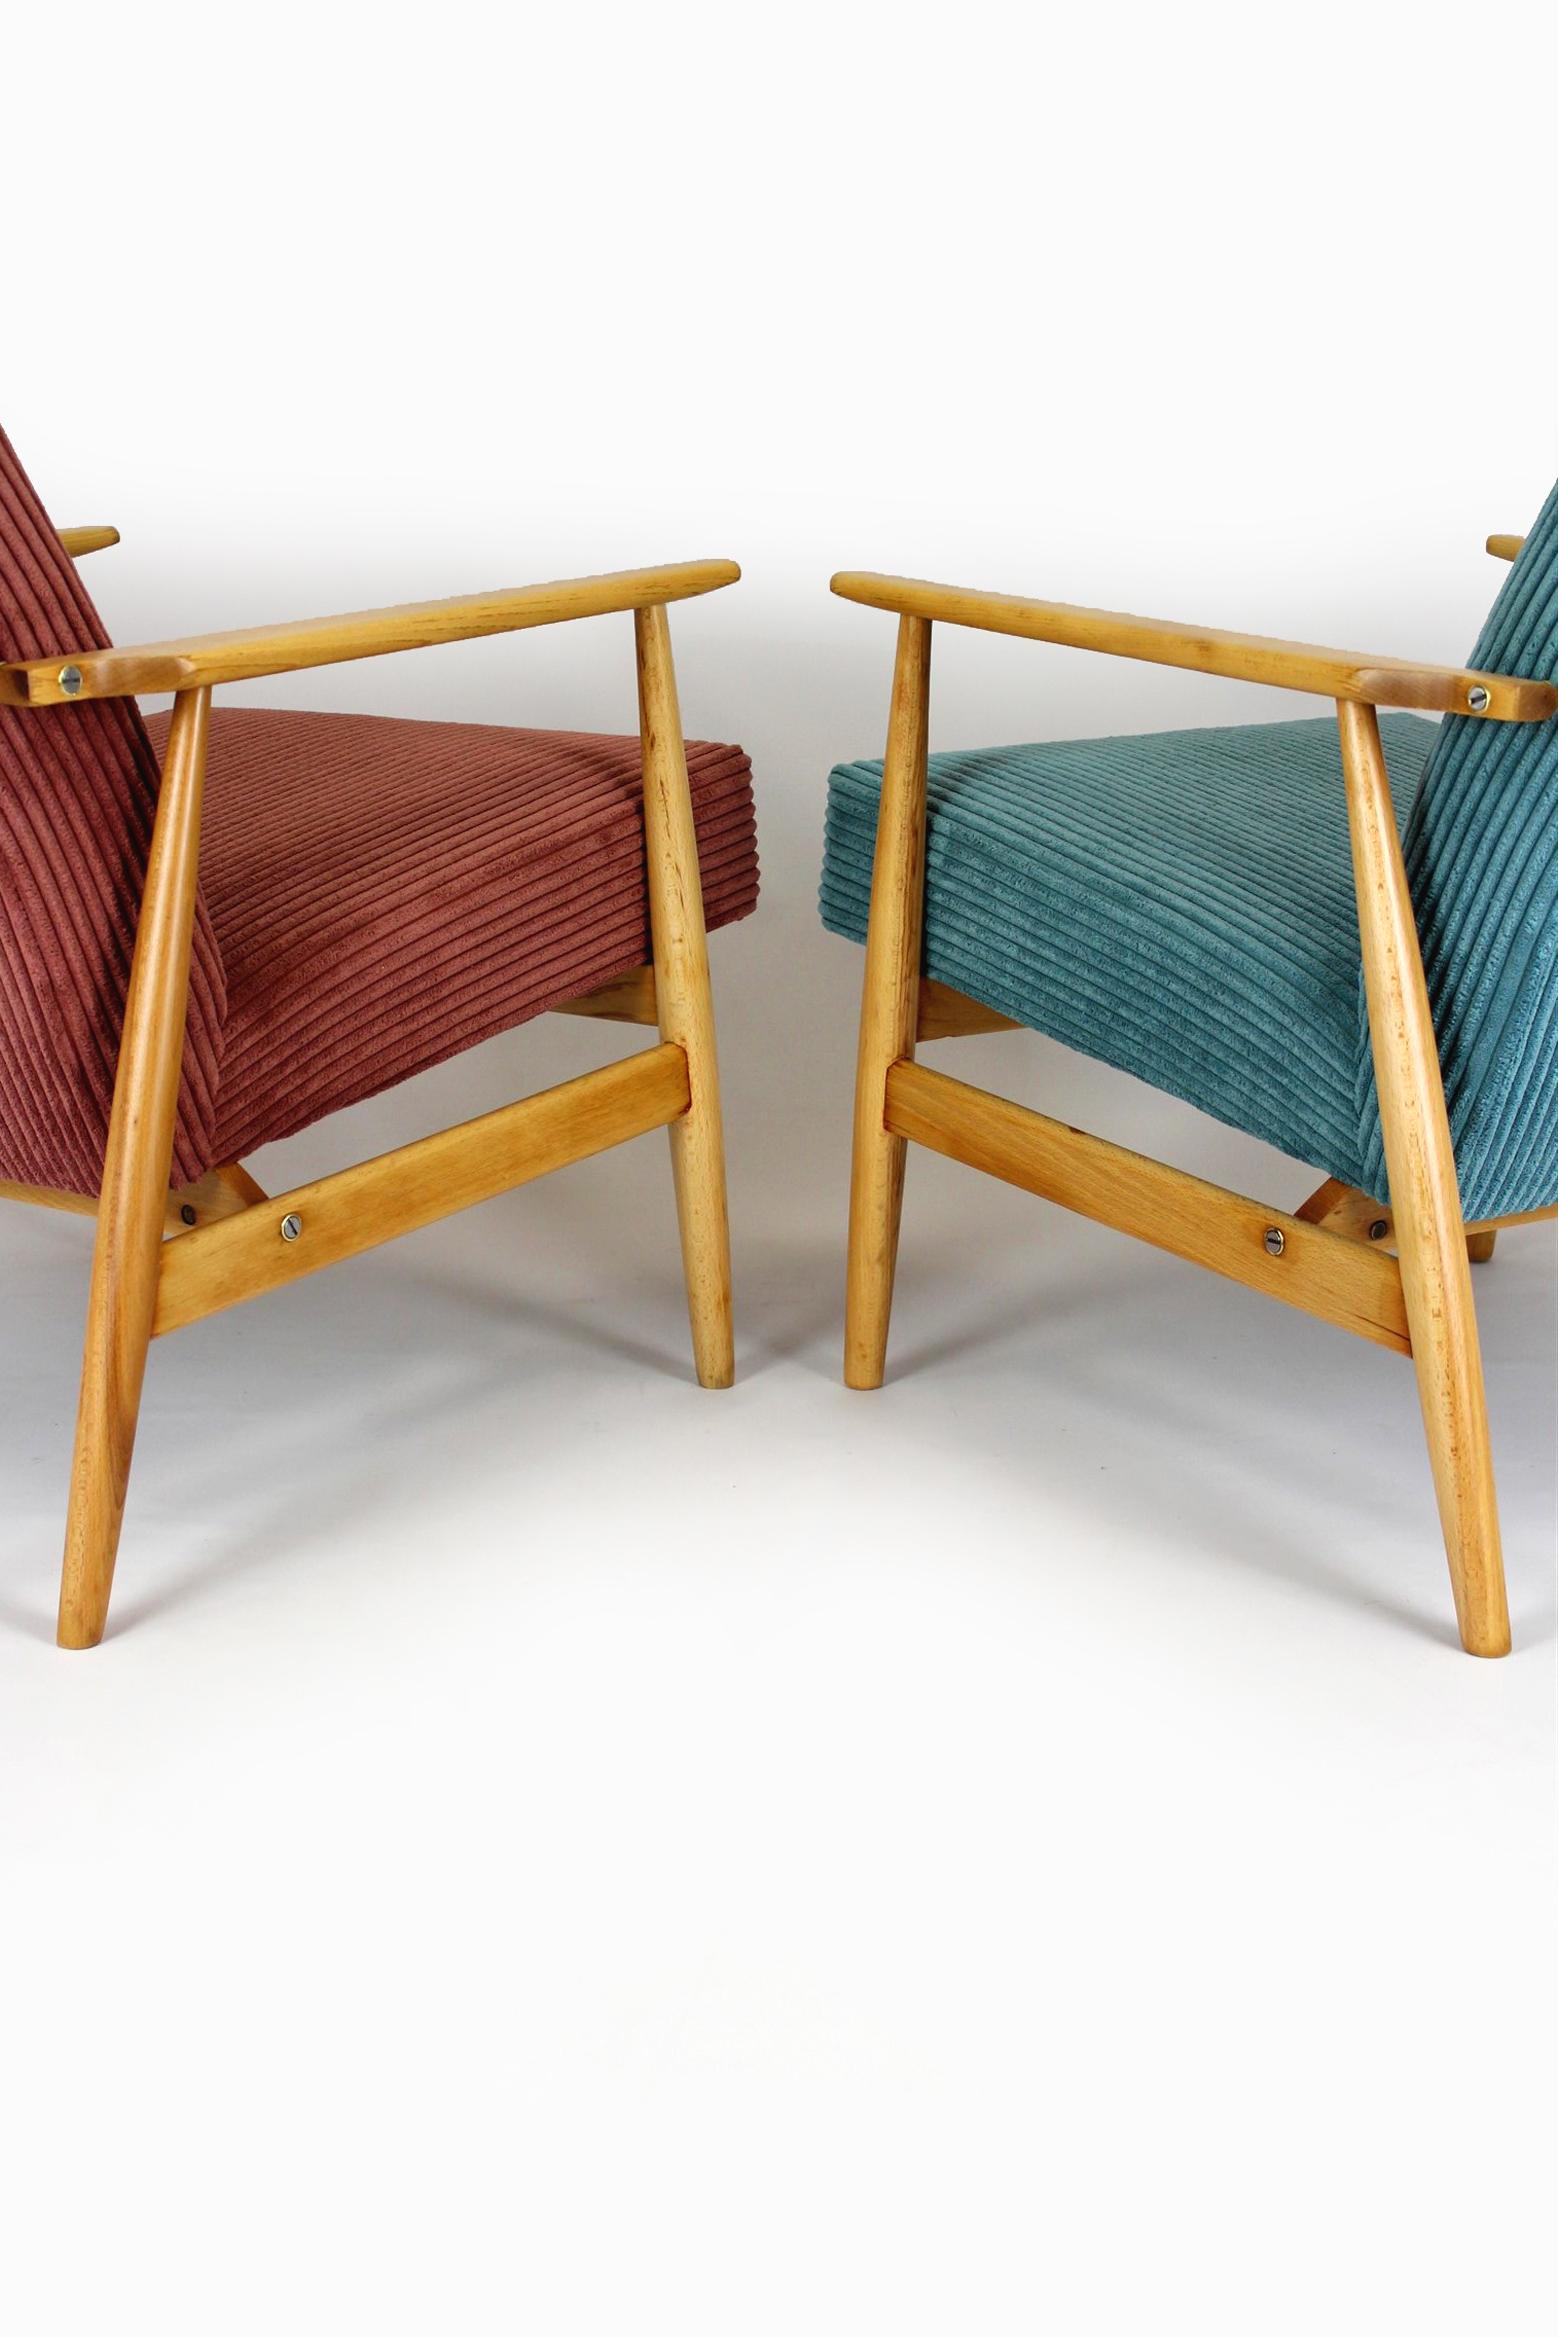 Restored Midcentury Pink & Turquoise Beech Armchairs, 1960s, Set of 2 For Sale 6